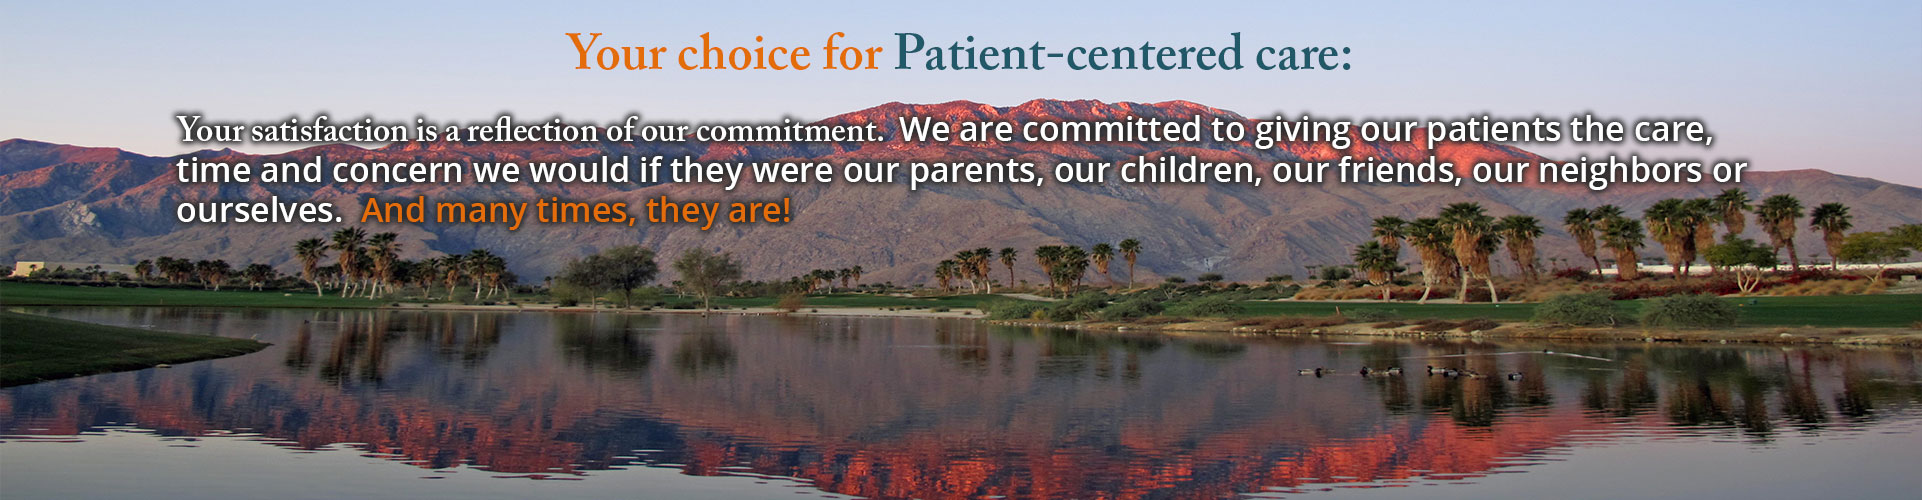 Banner picture of a Beautiful scenery of the sun setting over the mountains with palm trees. Banner says:

Your choice for Patient-centered care:

Your satisfaction is a reflection of our commitment. We are commited to giving our patients the care, time, and concern we would if they were our parents, our children, our friends, our neighbors, or ourselves. And many times, they are!